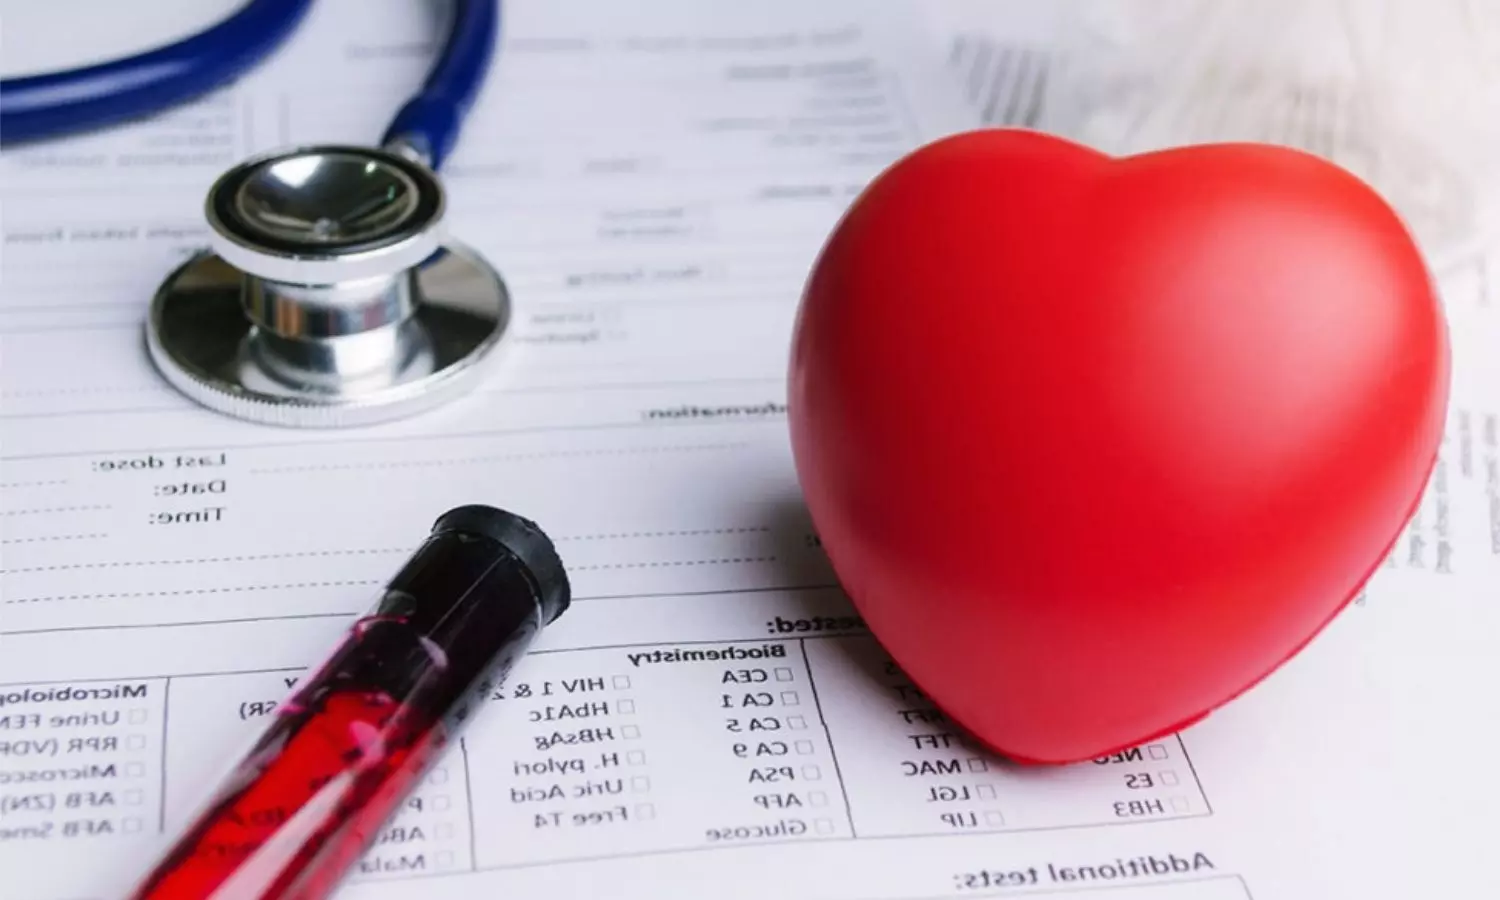 CCTA derived plaque data improves risk assessment of  heart disease  in diabetes patients: Study